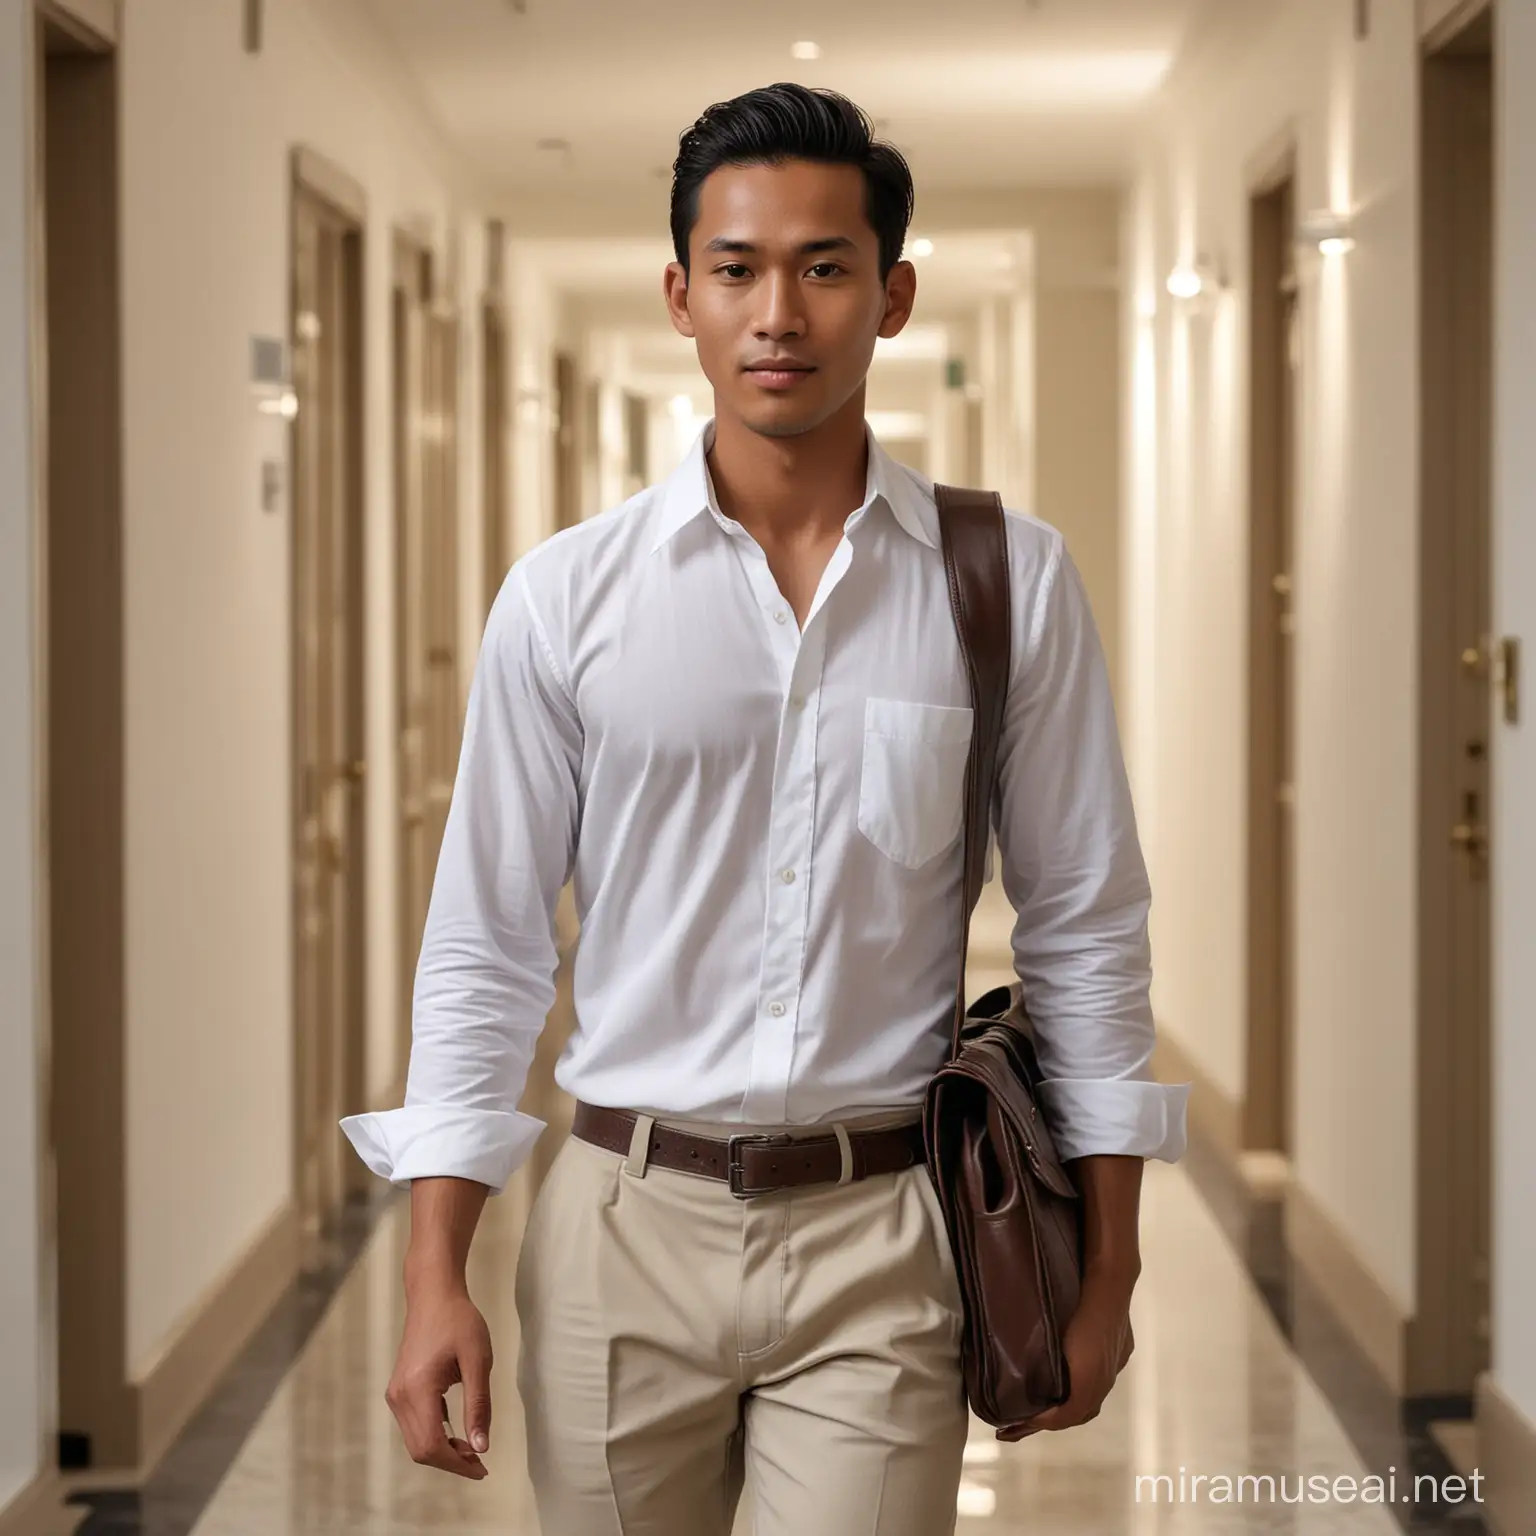 A young Indonesian man with brown skin, small stature, slim, approximately 35 years old, handsomely groomed, sporting a wet look "COMB OVER" hairstyle, wearing a white shirt (WITH TWO POCKETS AT THE FRONT), with a straight-facing countenance.

He walks through the corridors of a luxurious hotel, carrying a luxurious leather bag with a long strap over his shoulder.

In the background, people can be seen passing by.
Arrange the image with HD 4K ultra-realistic quality, making it appear incredibly lifelike, truly realistic, and entirely authentic.